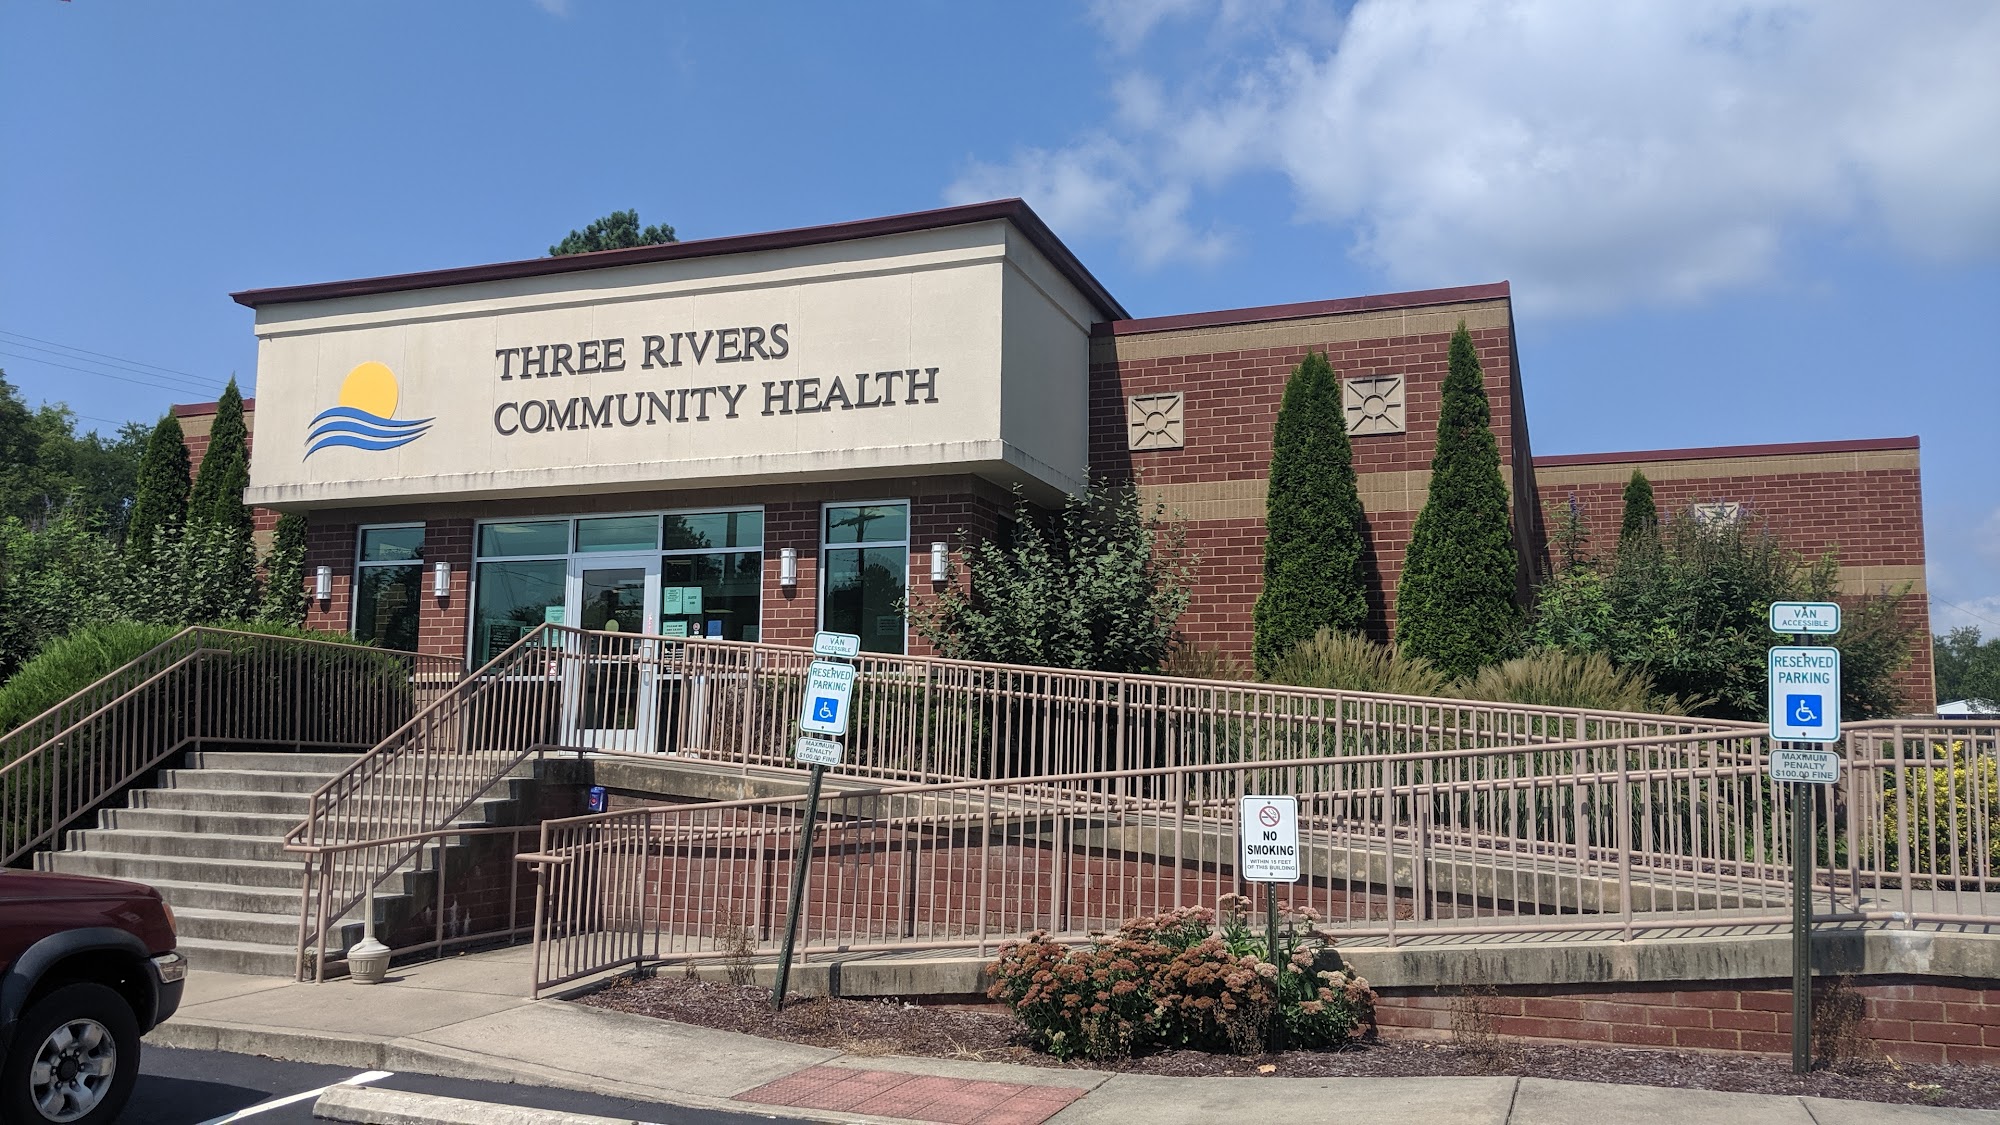 Three Rivers Community Health 7723 Clearview Church Ln, Lyles Tennessee 37098